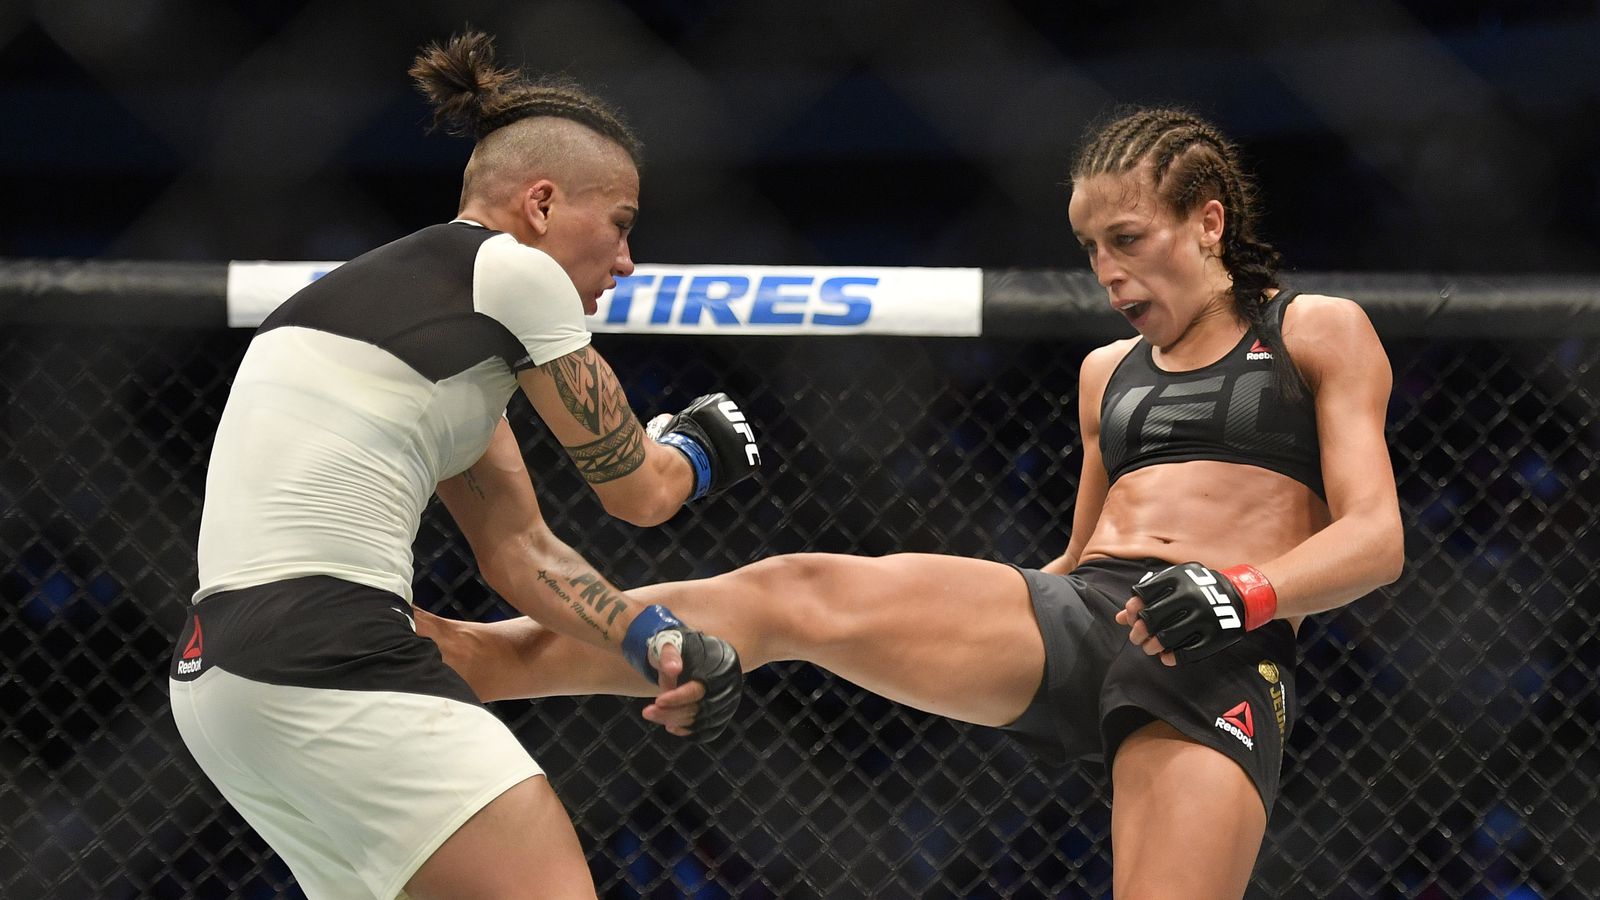 Joanna Jedrzejczyk gave major props to American Top Team for what she deeme...